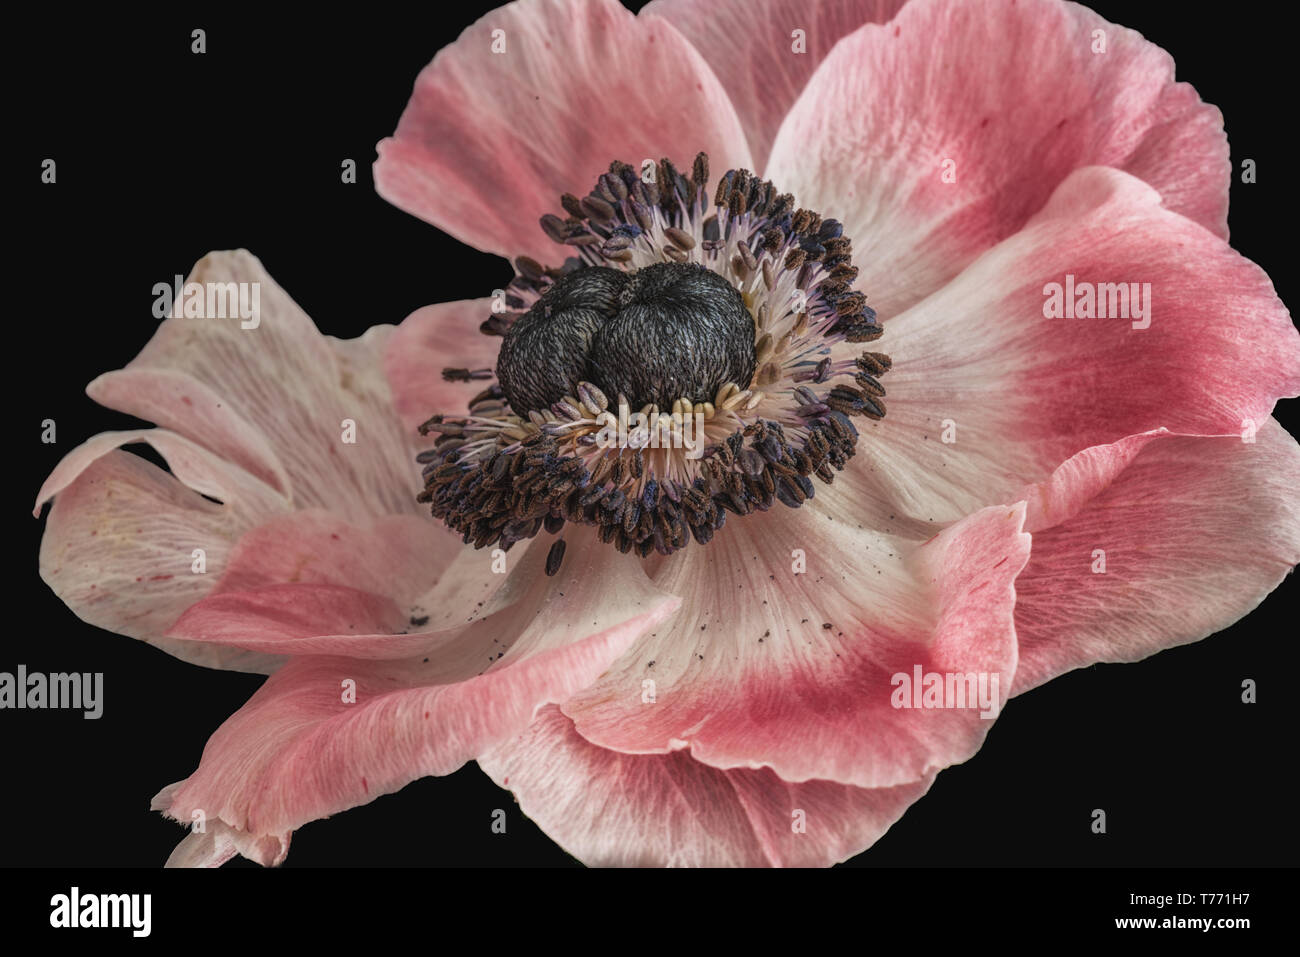 Fine art still life floral macro of a single isolated wide open bright white pink blue anemone blossom with detailed texture on black background Stock Photo